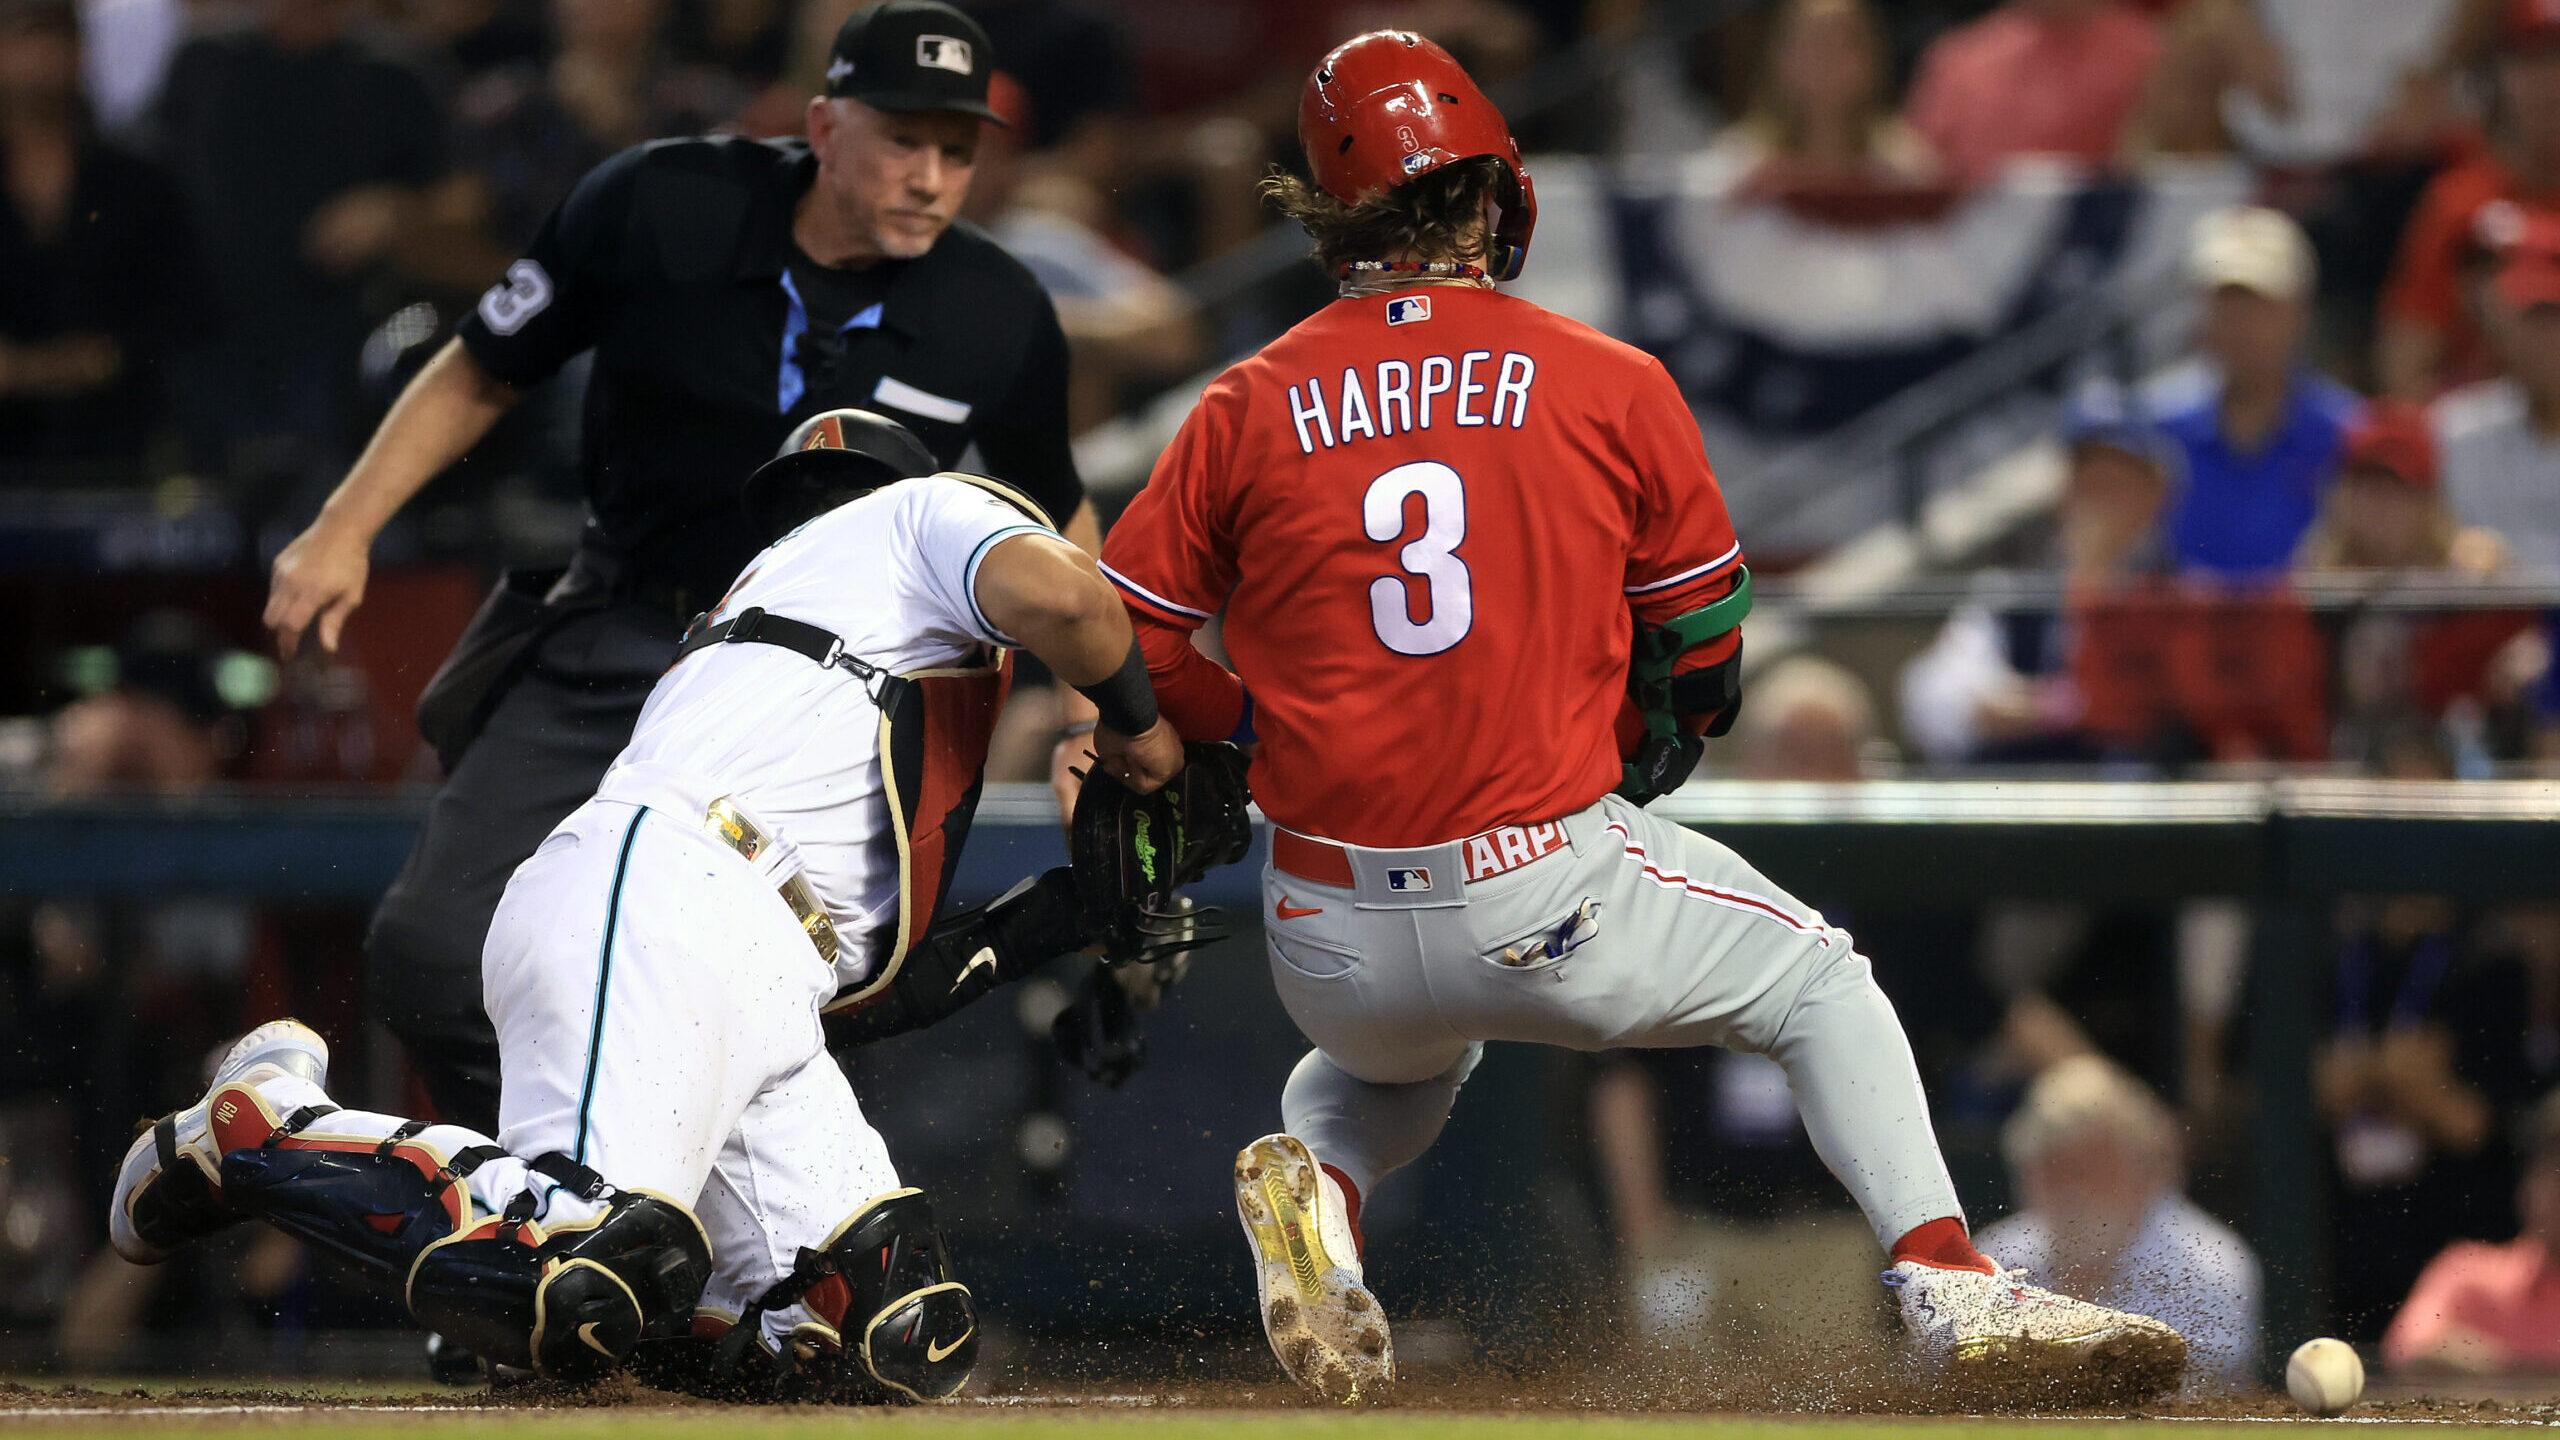 Bryce Harper and Gabriel Moreno collide in 1st inning play at the plate